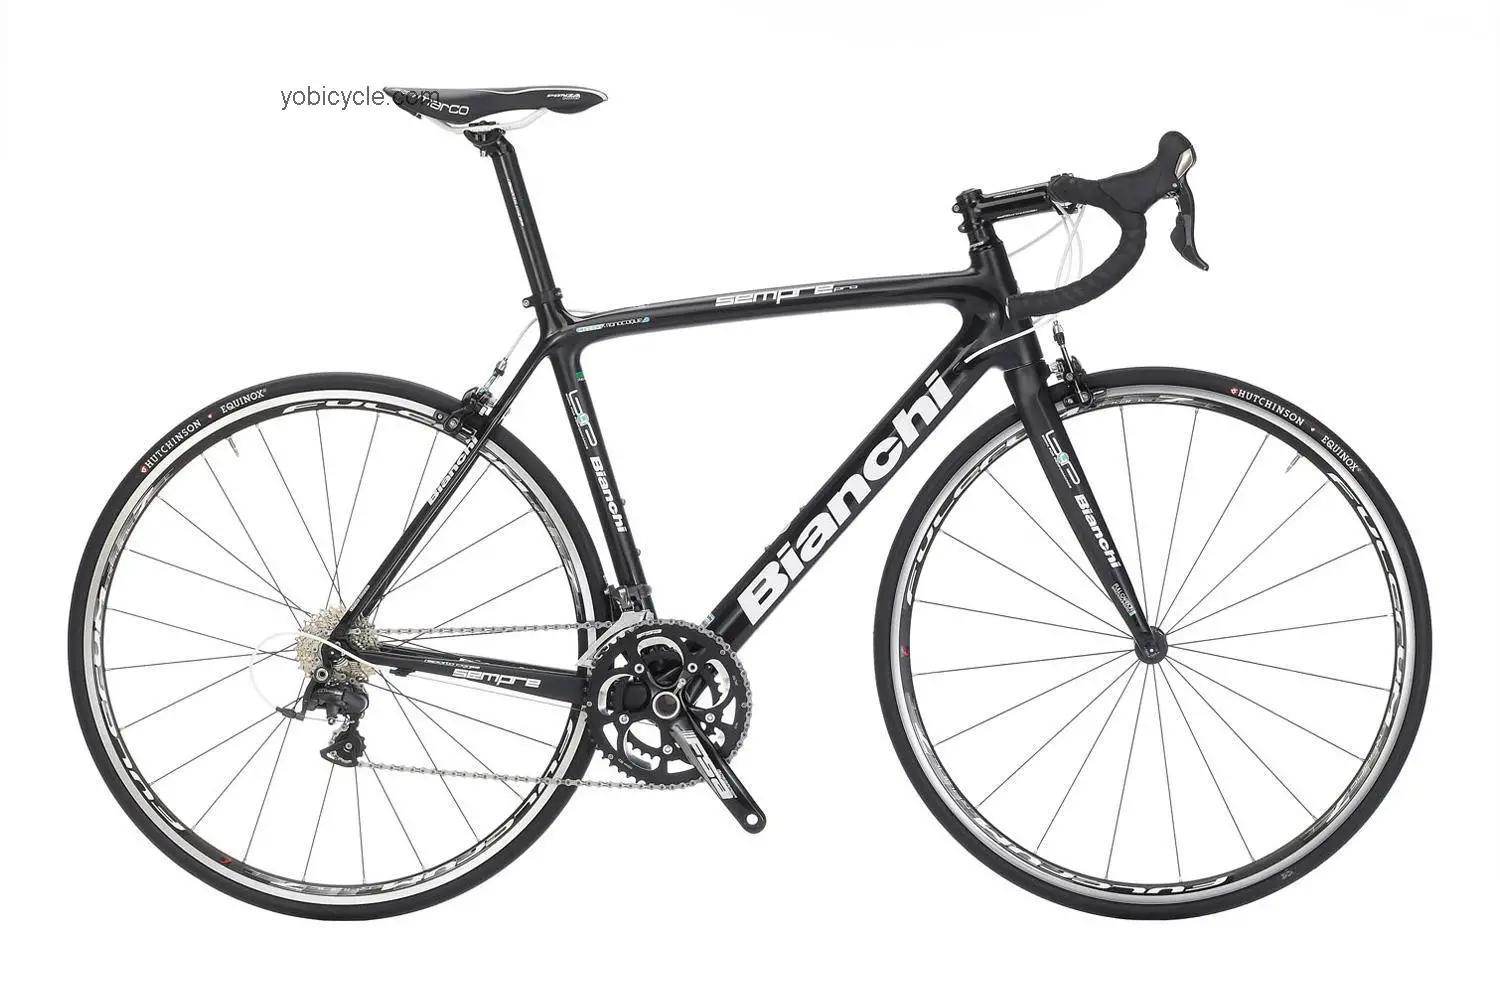 Bianchi Sempre Ultegra competitors and comparison tool online specs and performance